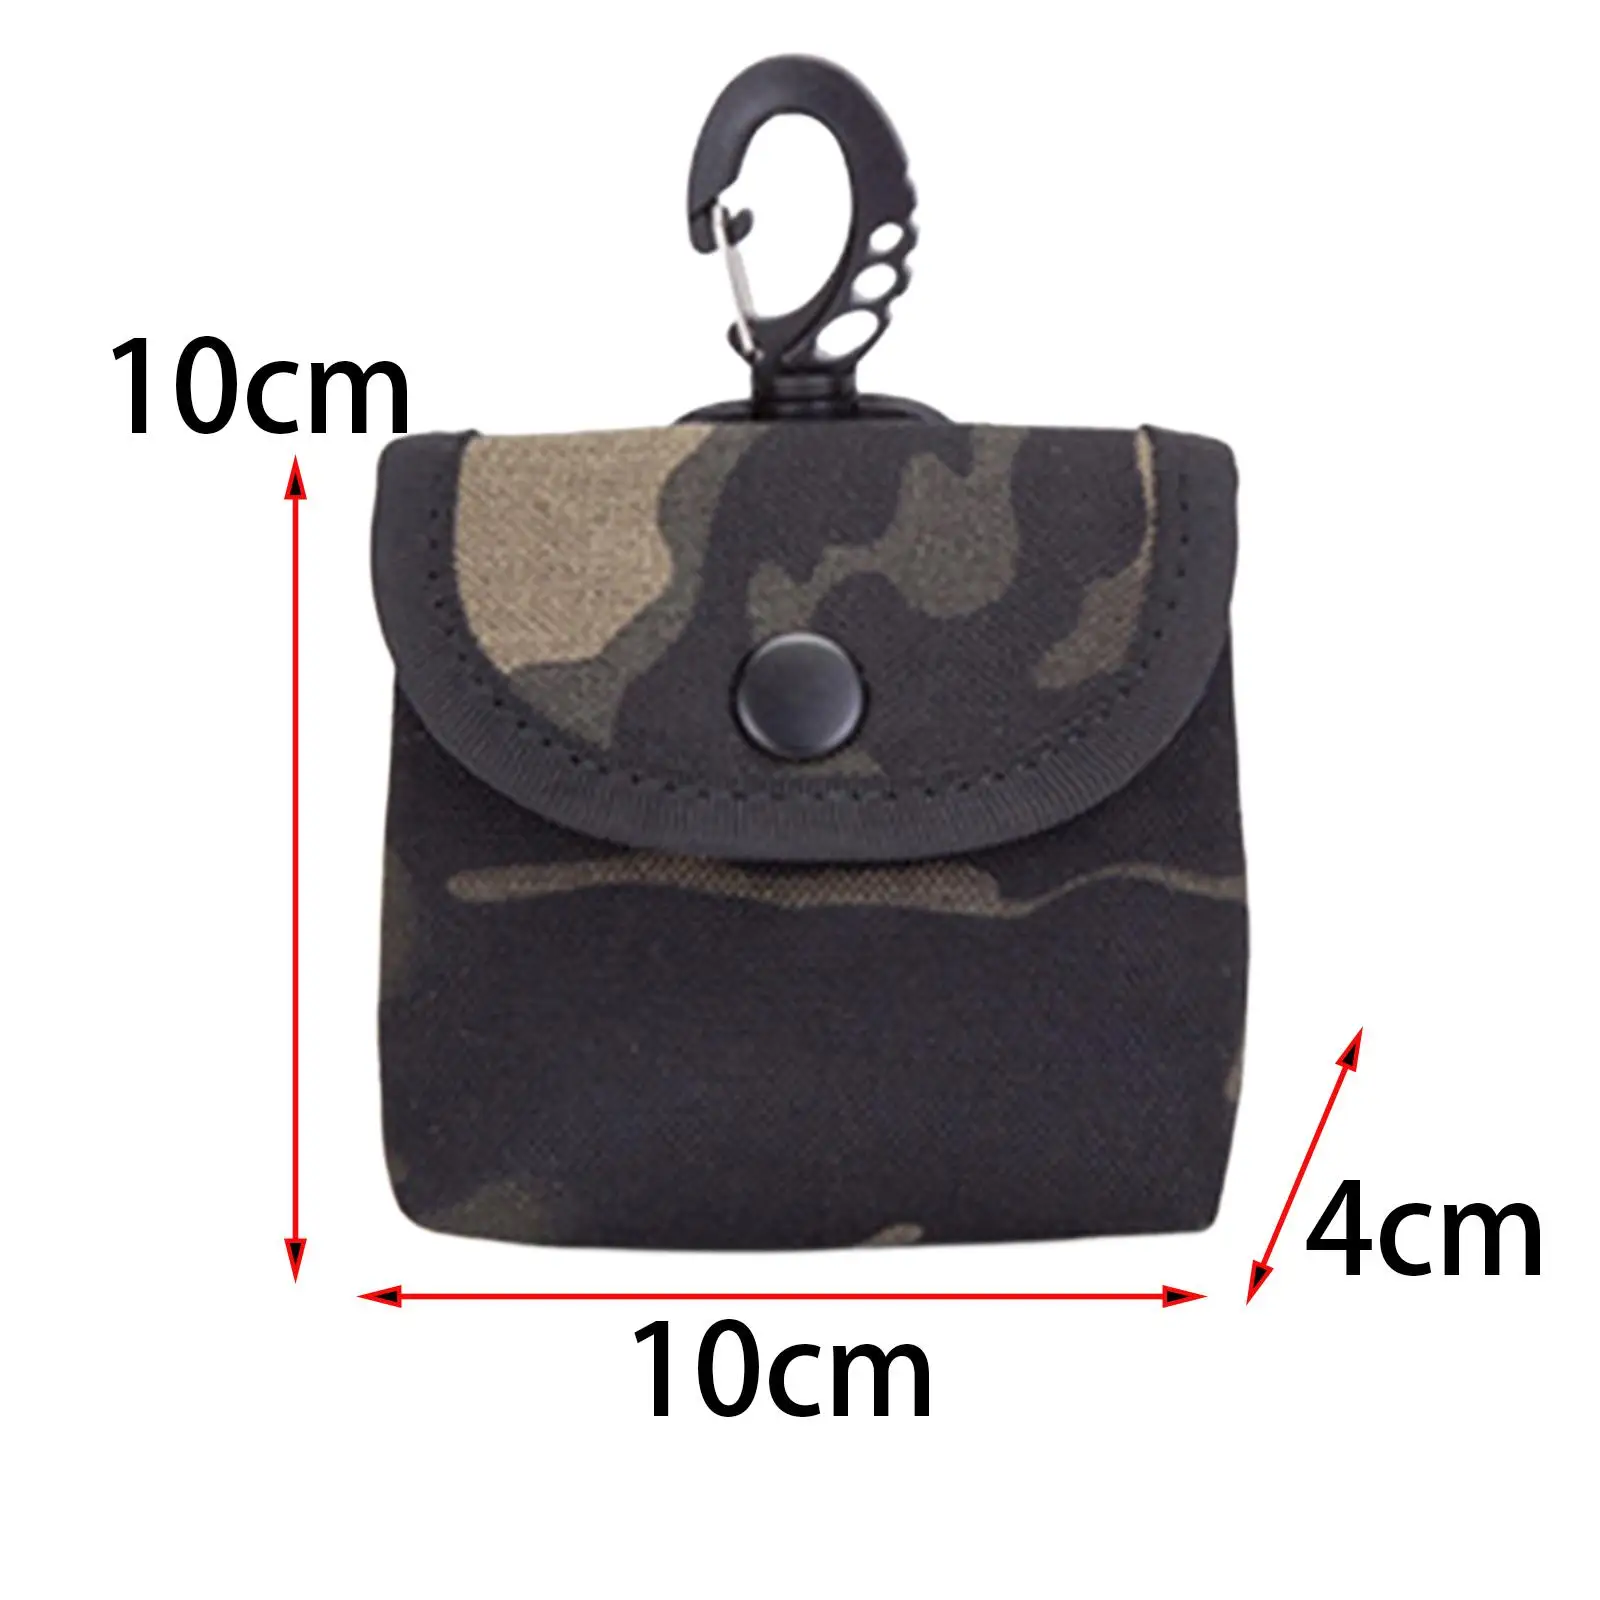 Keychain Pouch Compact Small Waist Pack ID Card Holder Change Purse Wallet